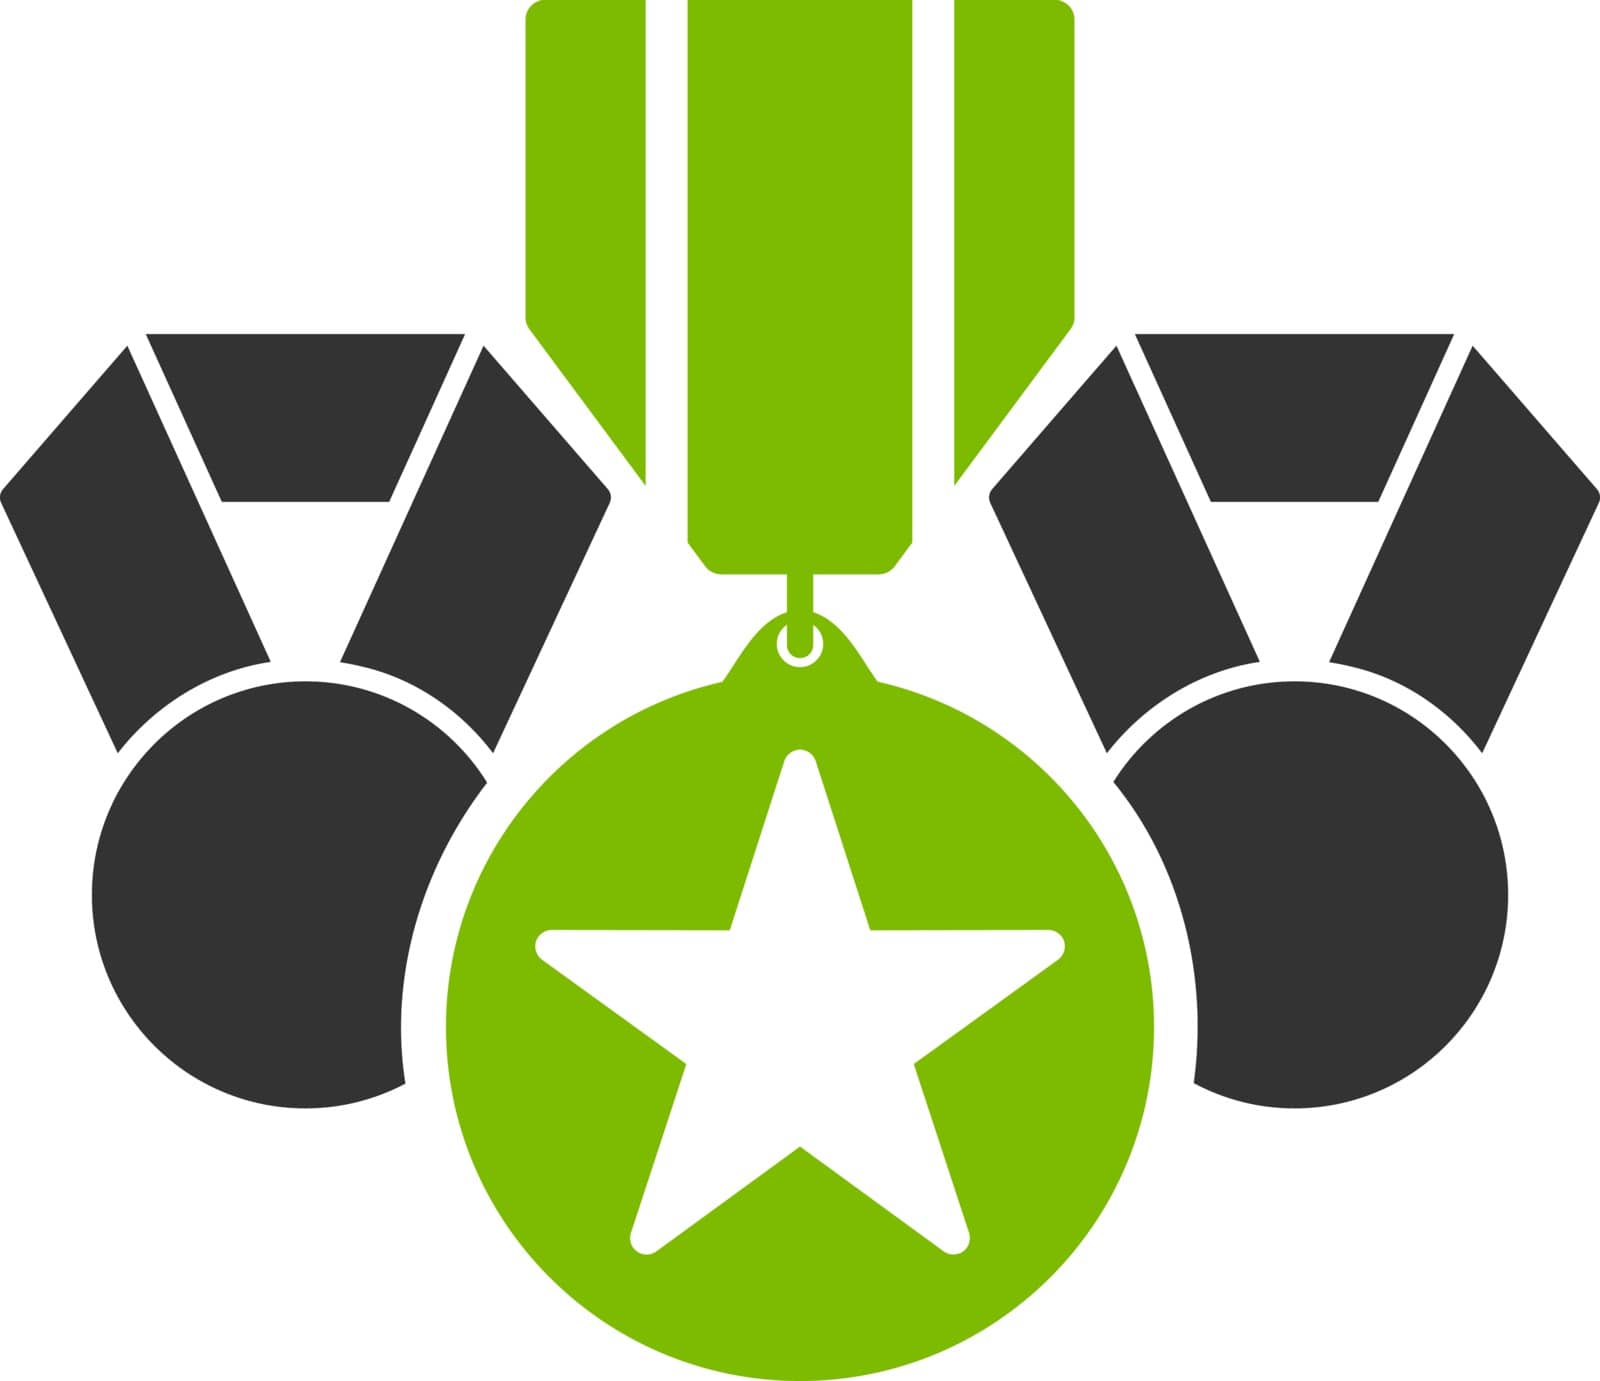 Awards icon from Competition & Success Bicolor Icon Set by ahasoft